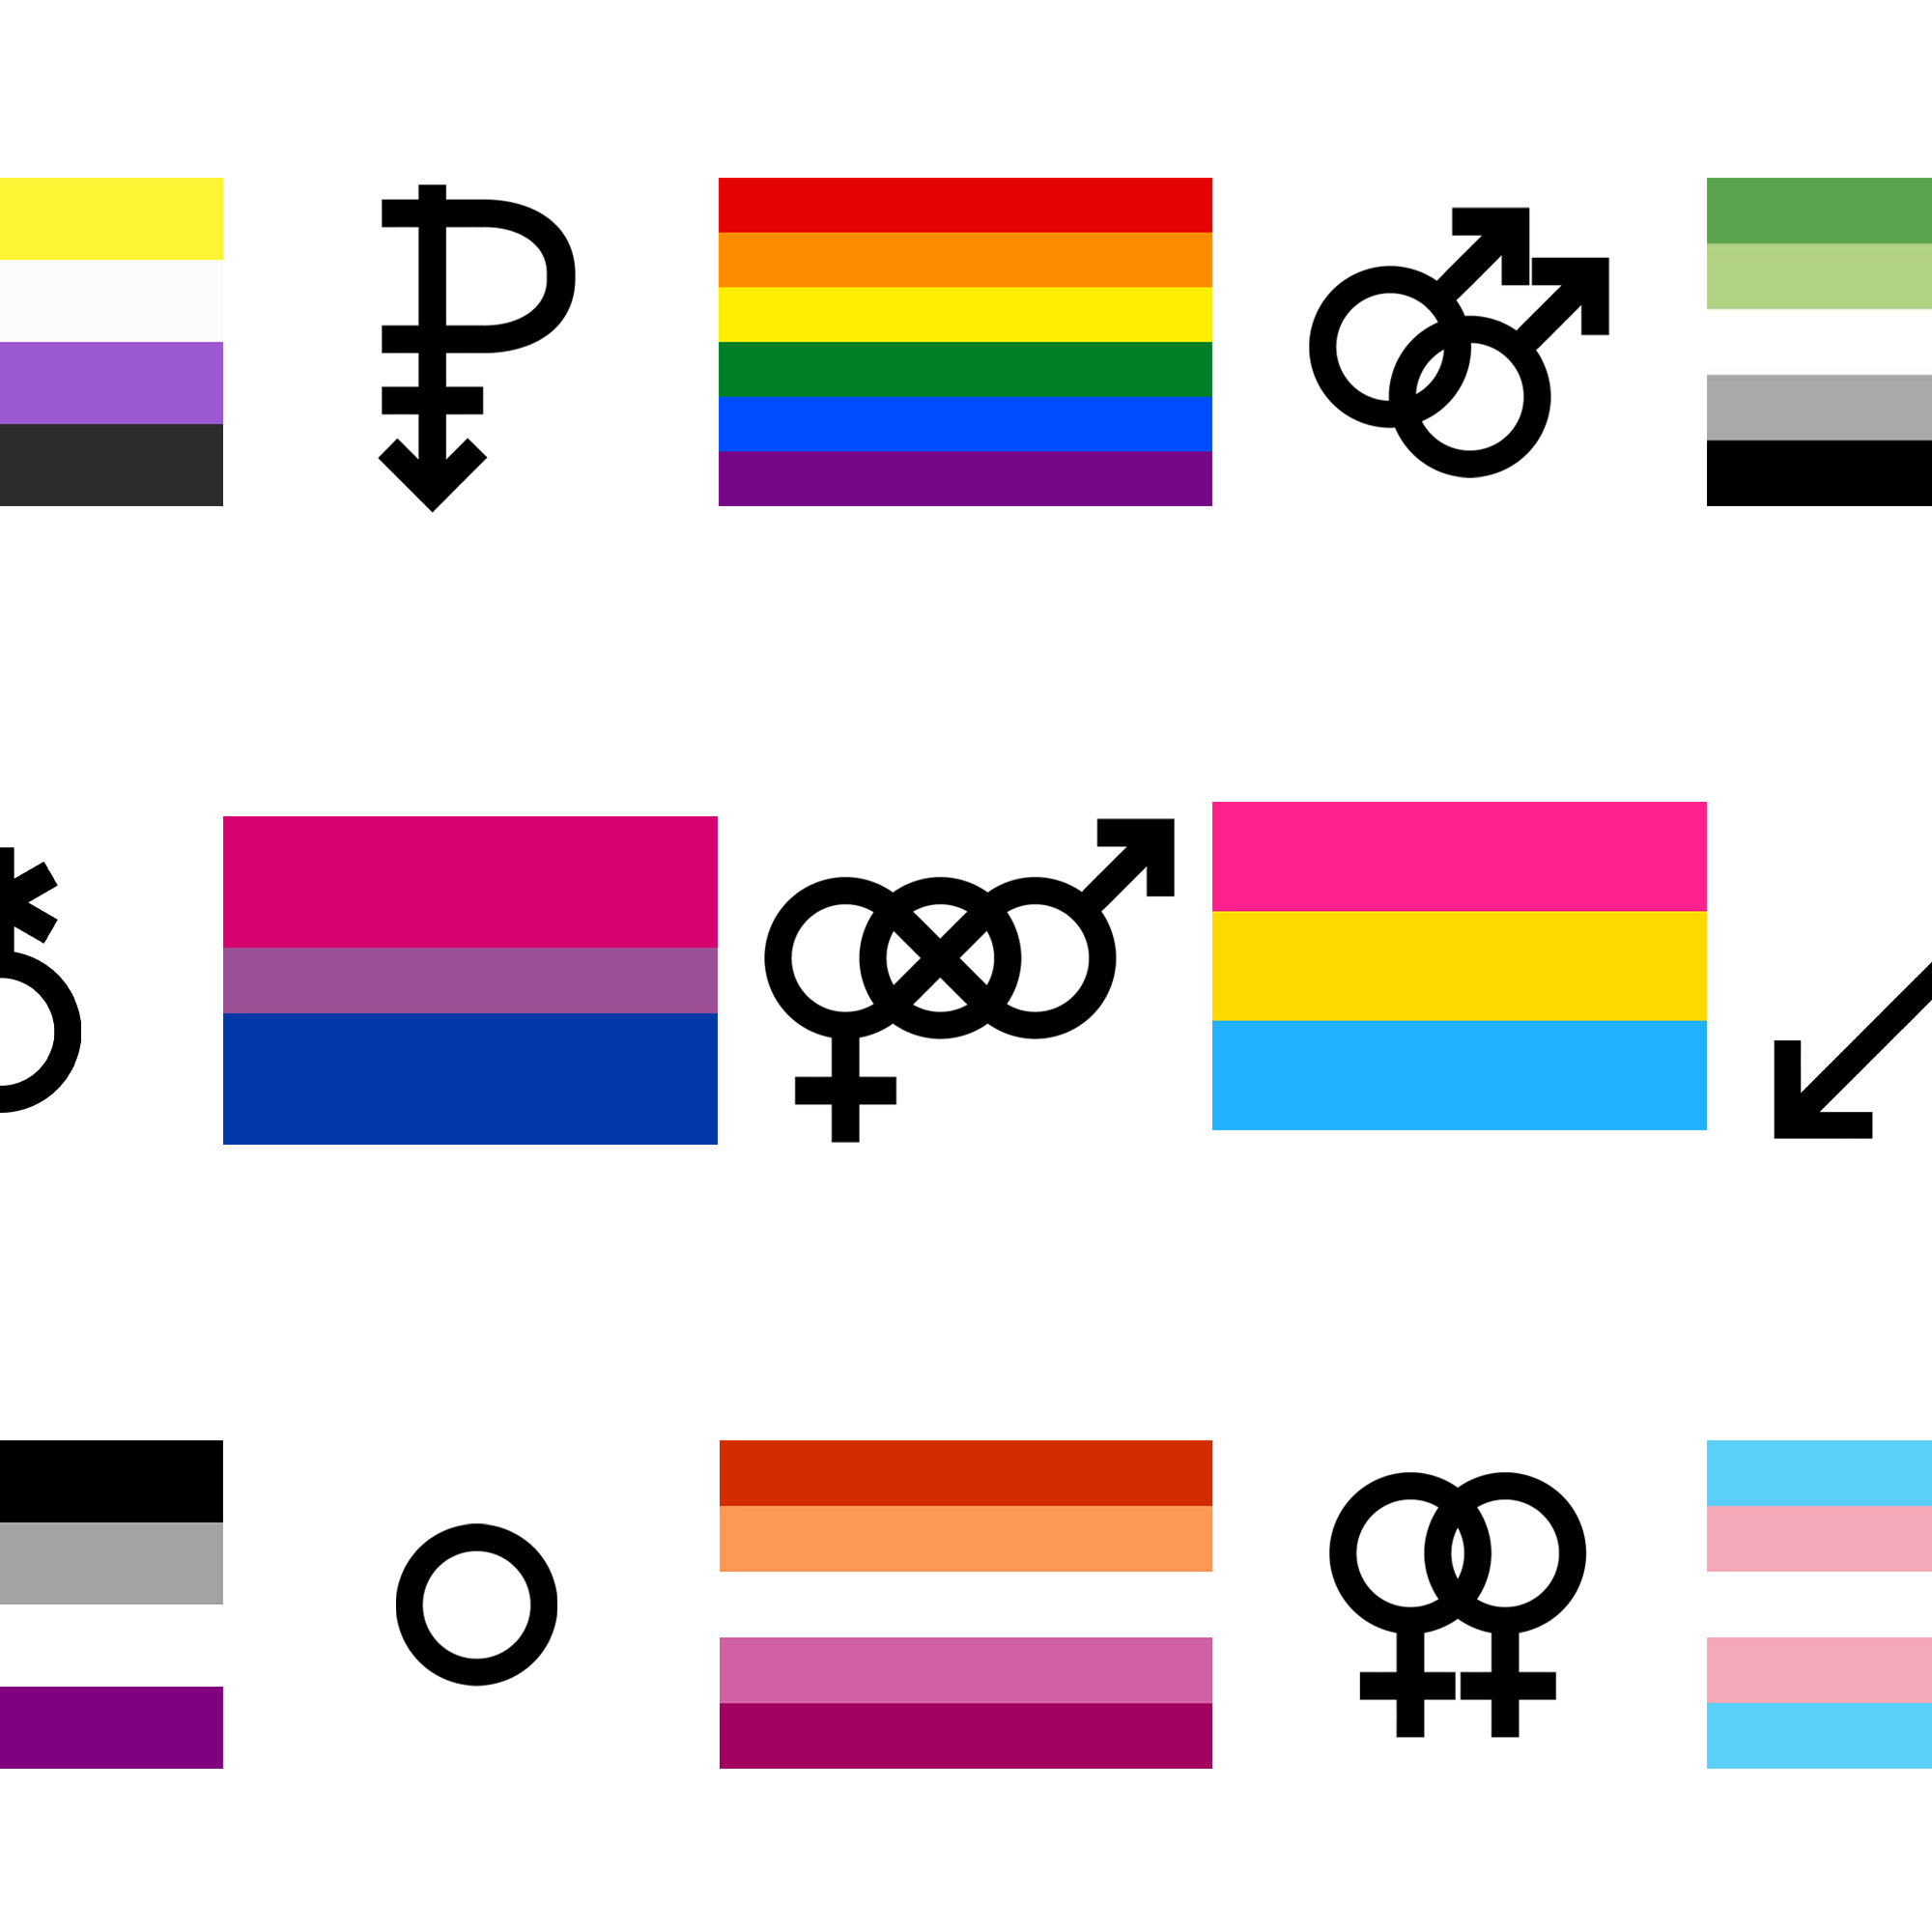 pattern of pride flags and symbols including nonbinary, rainbow, aromantic, bisexual, pansexual, asexual, lesbian, and transgender